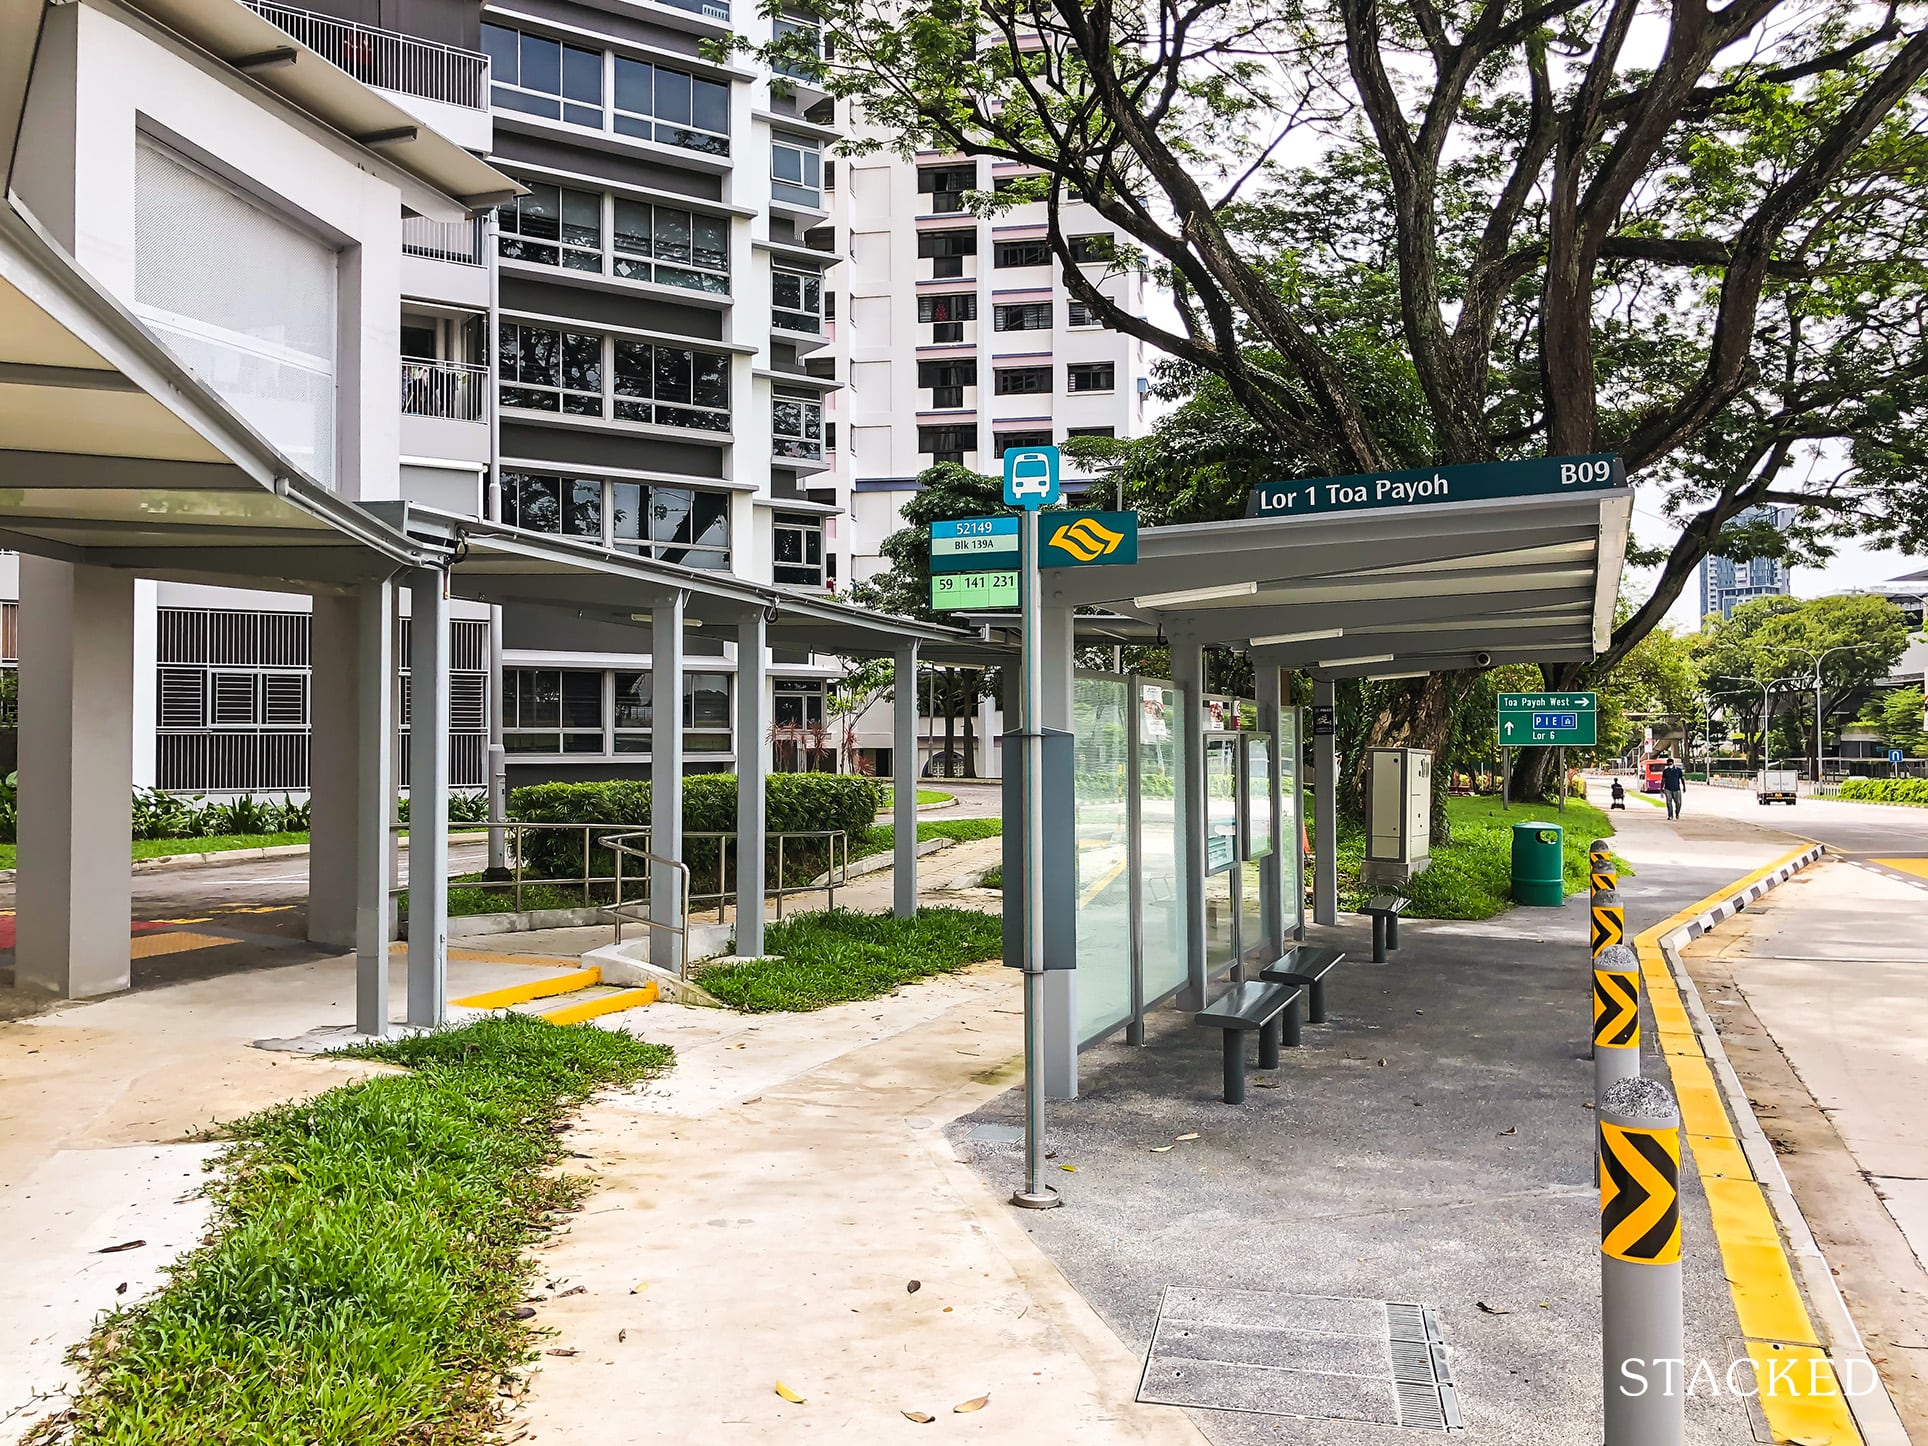 The Peak @ Toa Payoh 19 bus stop